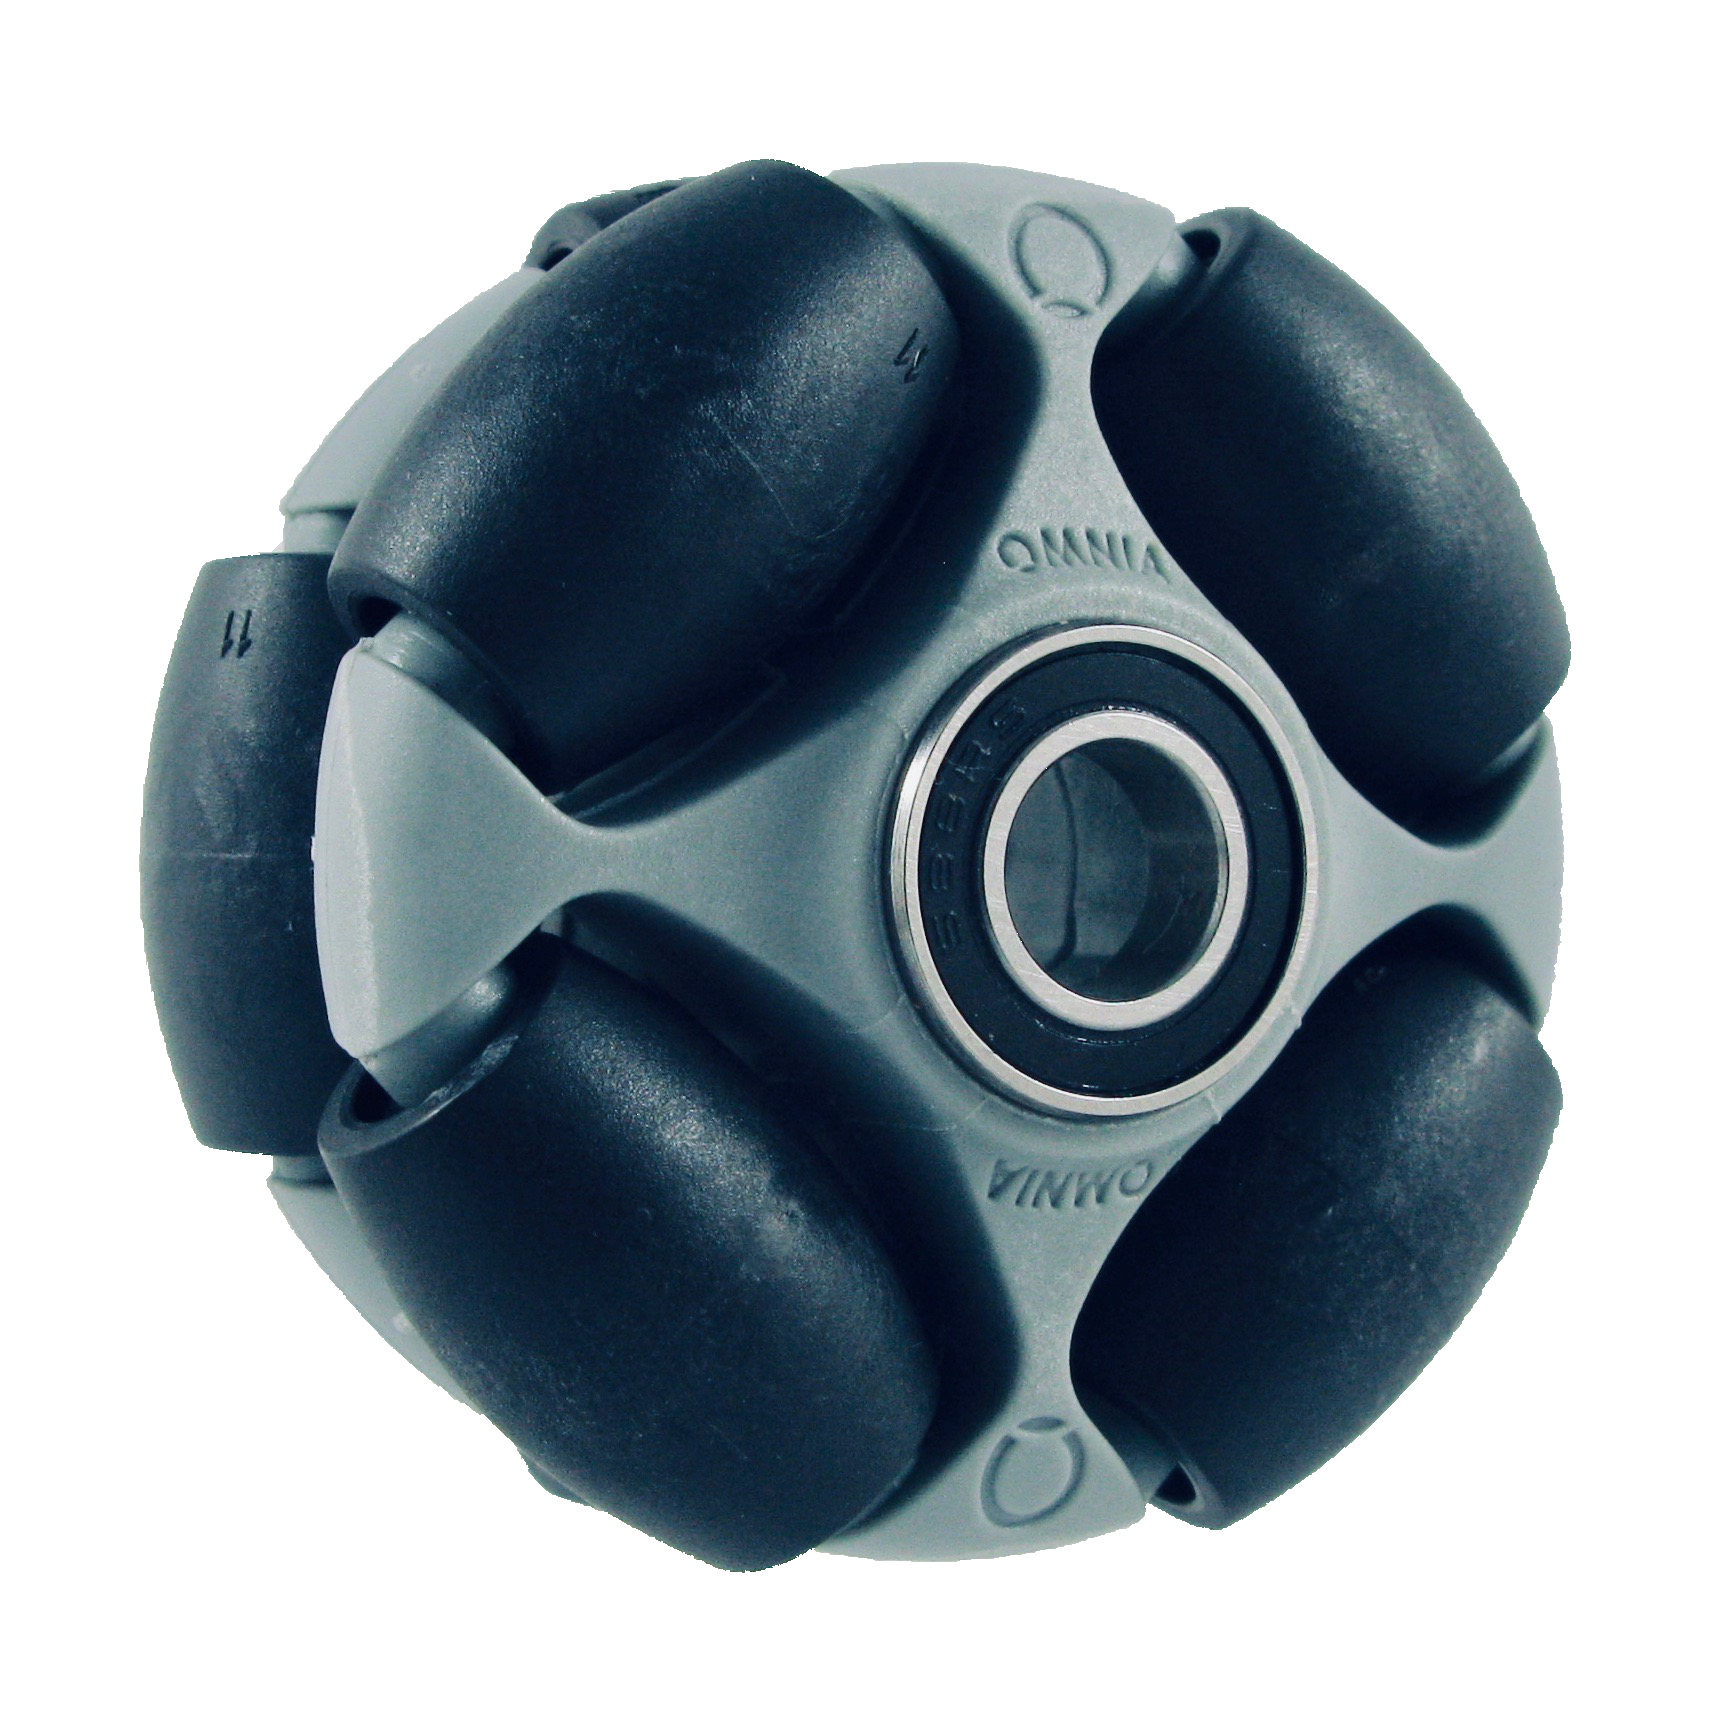 50mm Omni Wheel with 8mm steel bearing (select preferred roller hardness)